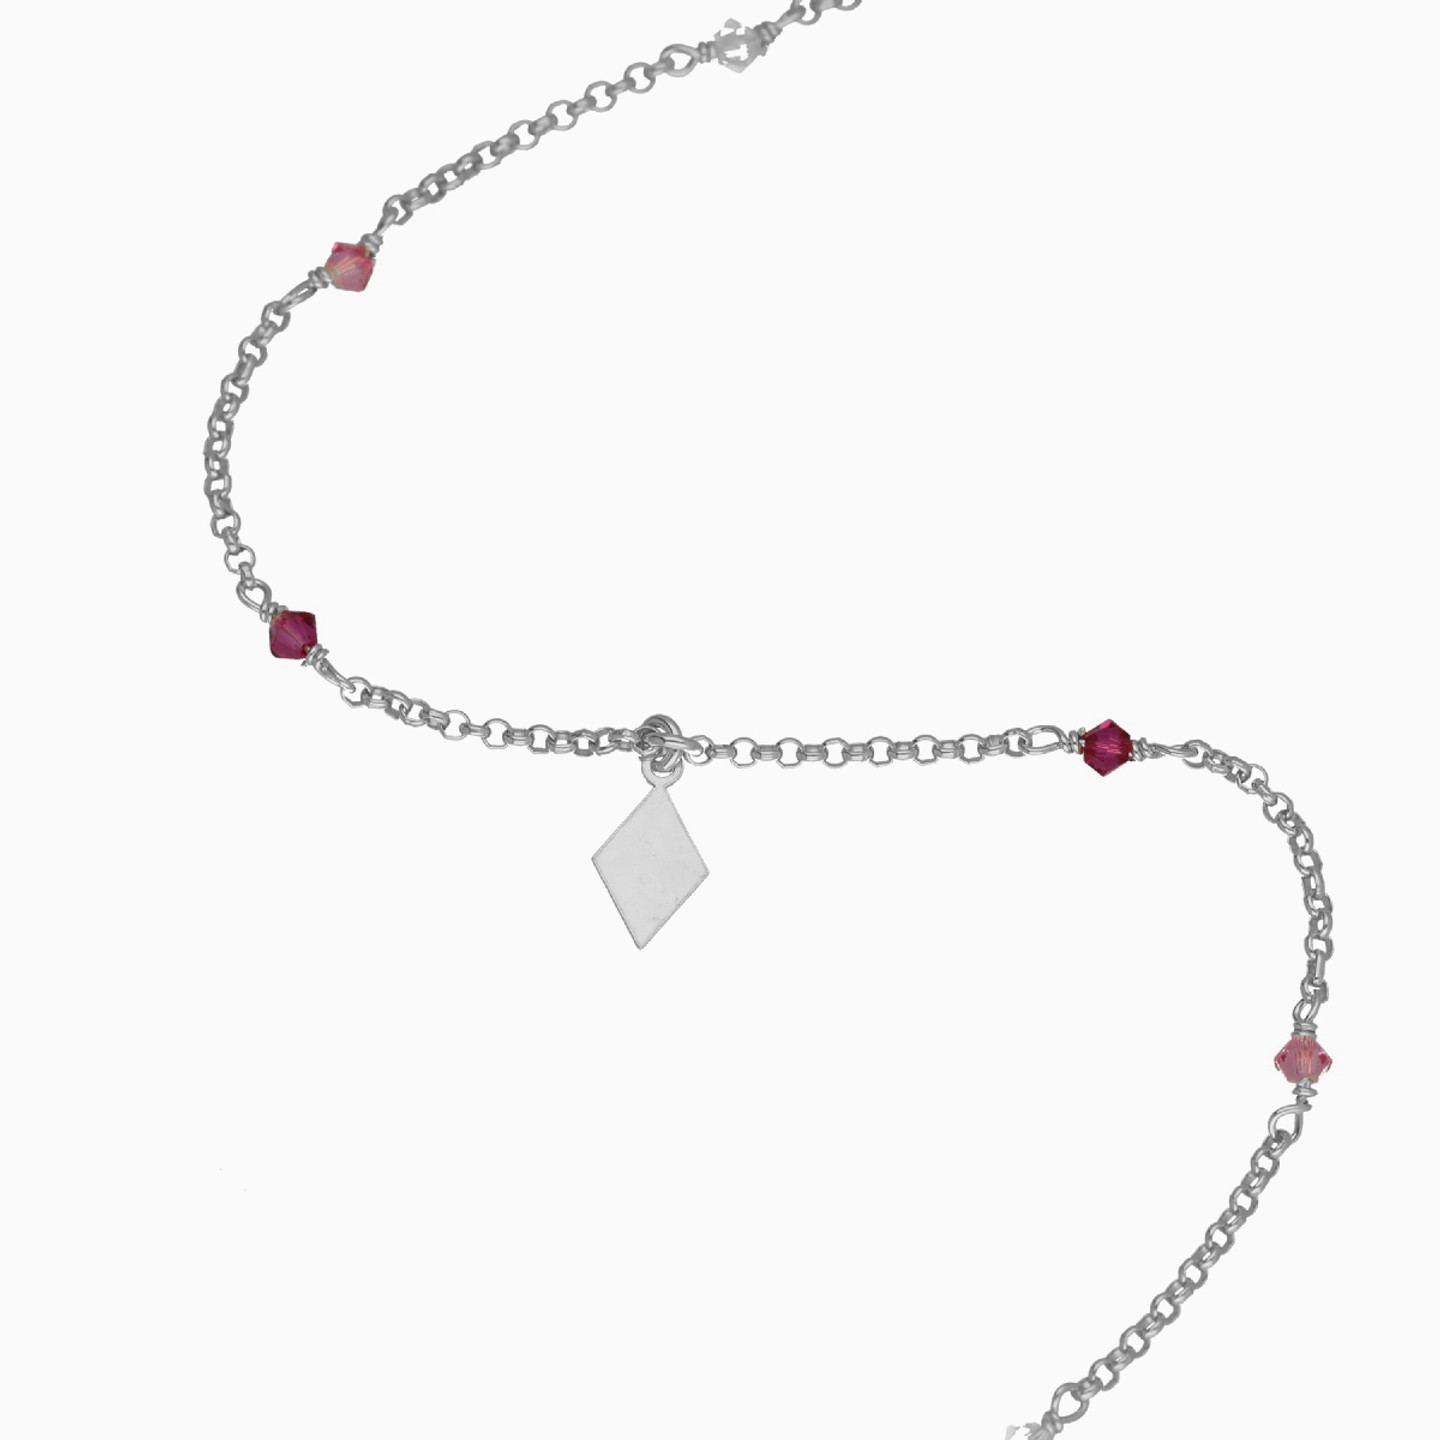 Sterling Silver Colored Stones Chain Anklet - 3